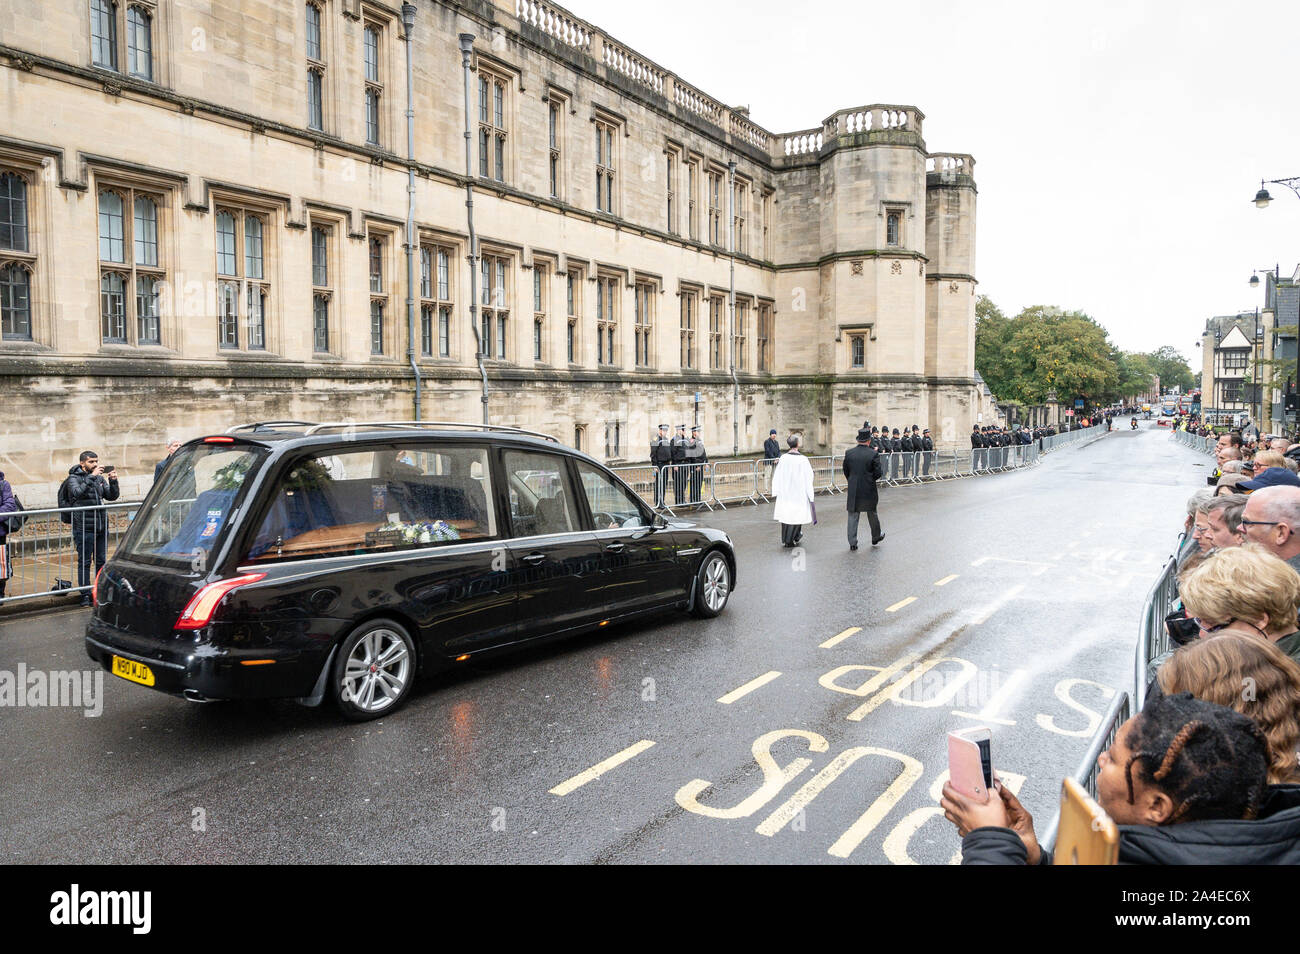 Oxford, UK. 14th October 2019. Funeral of PC Andrew Harper at Christchuch College, Oxford, UK. PC Harper, 28, was responding to reports of a burglary in Berkshire when he was dragged under a van in August. Andrew Walmsley/Alamy Live News Stock Photo